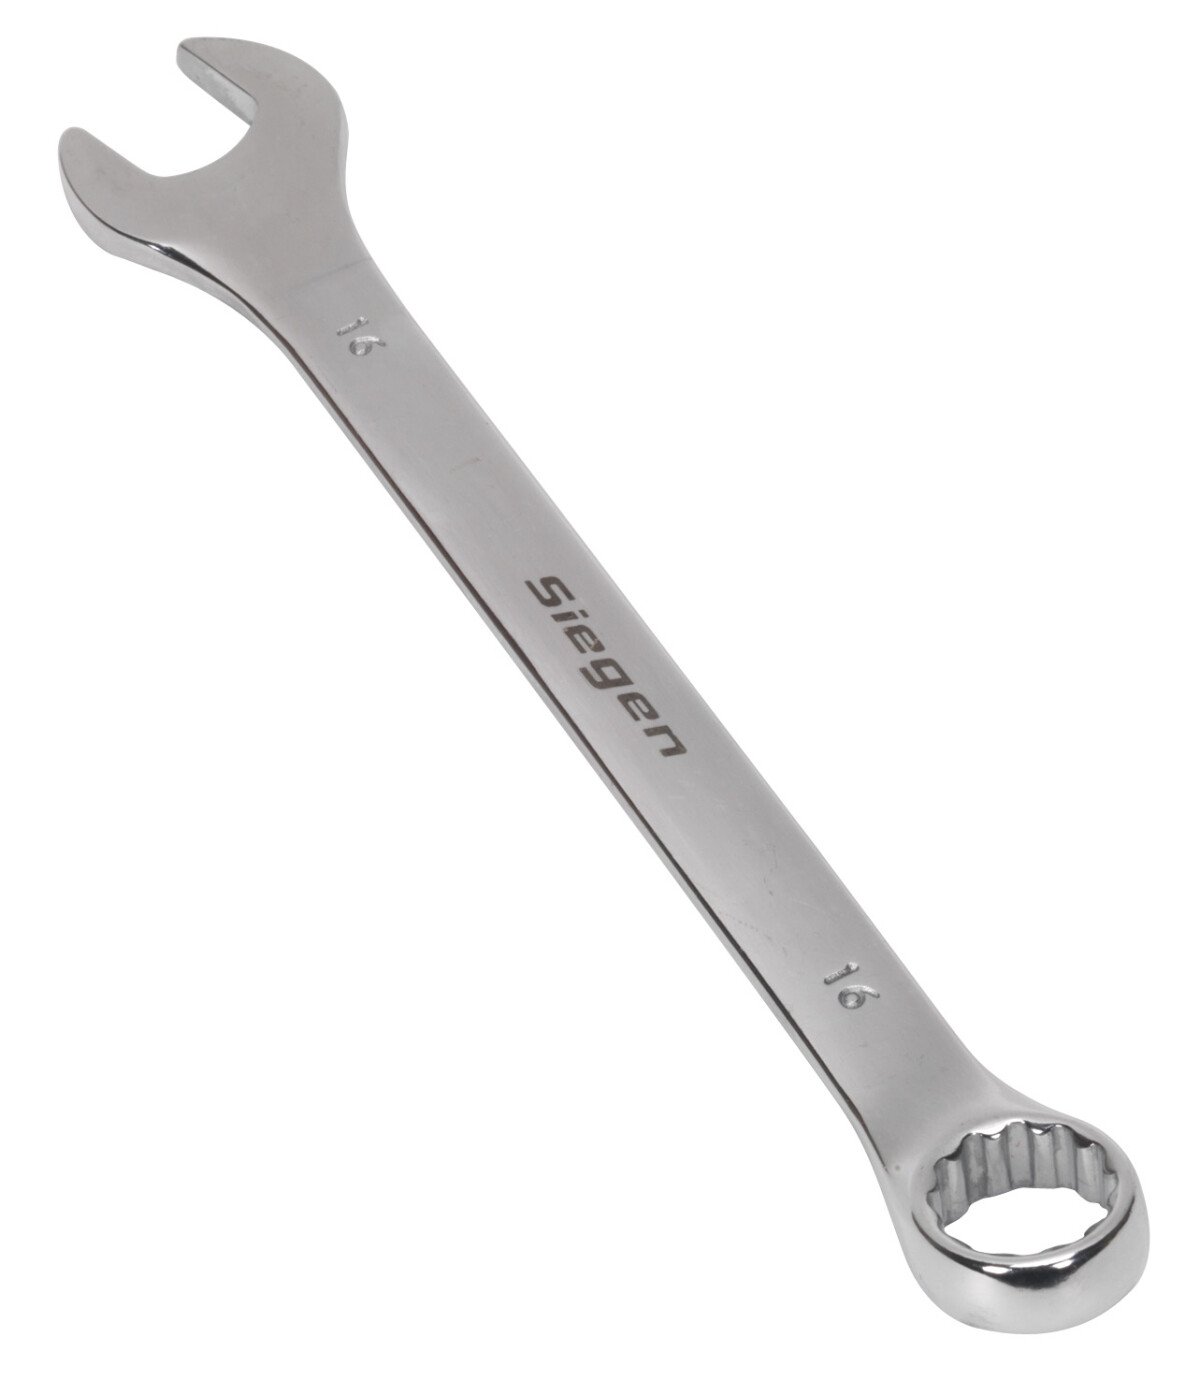 Sealey S01016 Combination Spanner 16mm